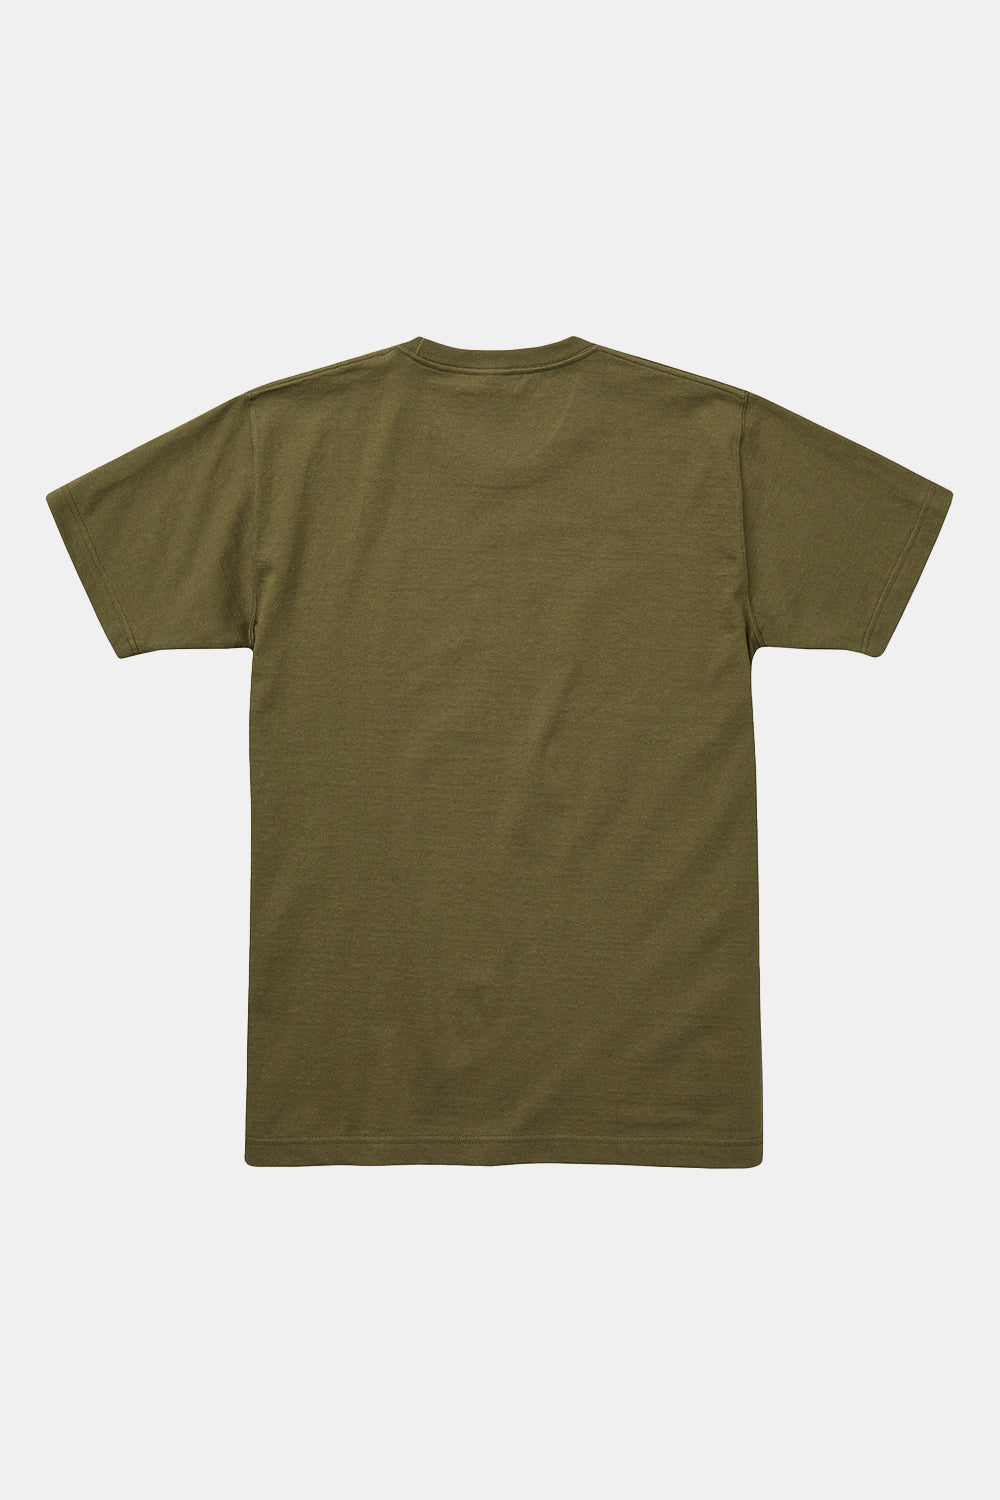 United Athle 4252 Authentic Super Heavyweight 7.1oz T-shirt (Light Olive)